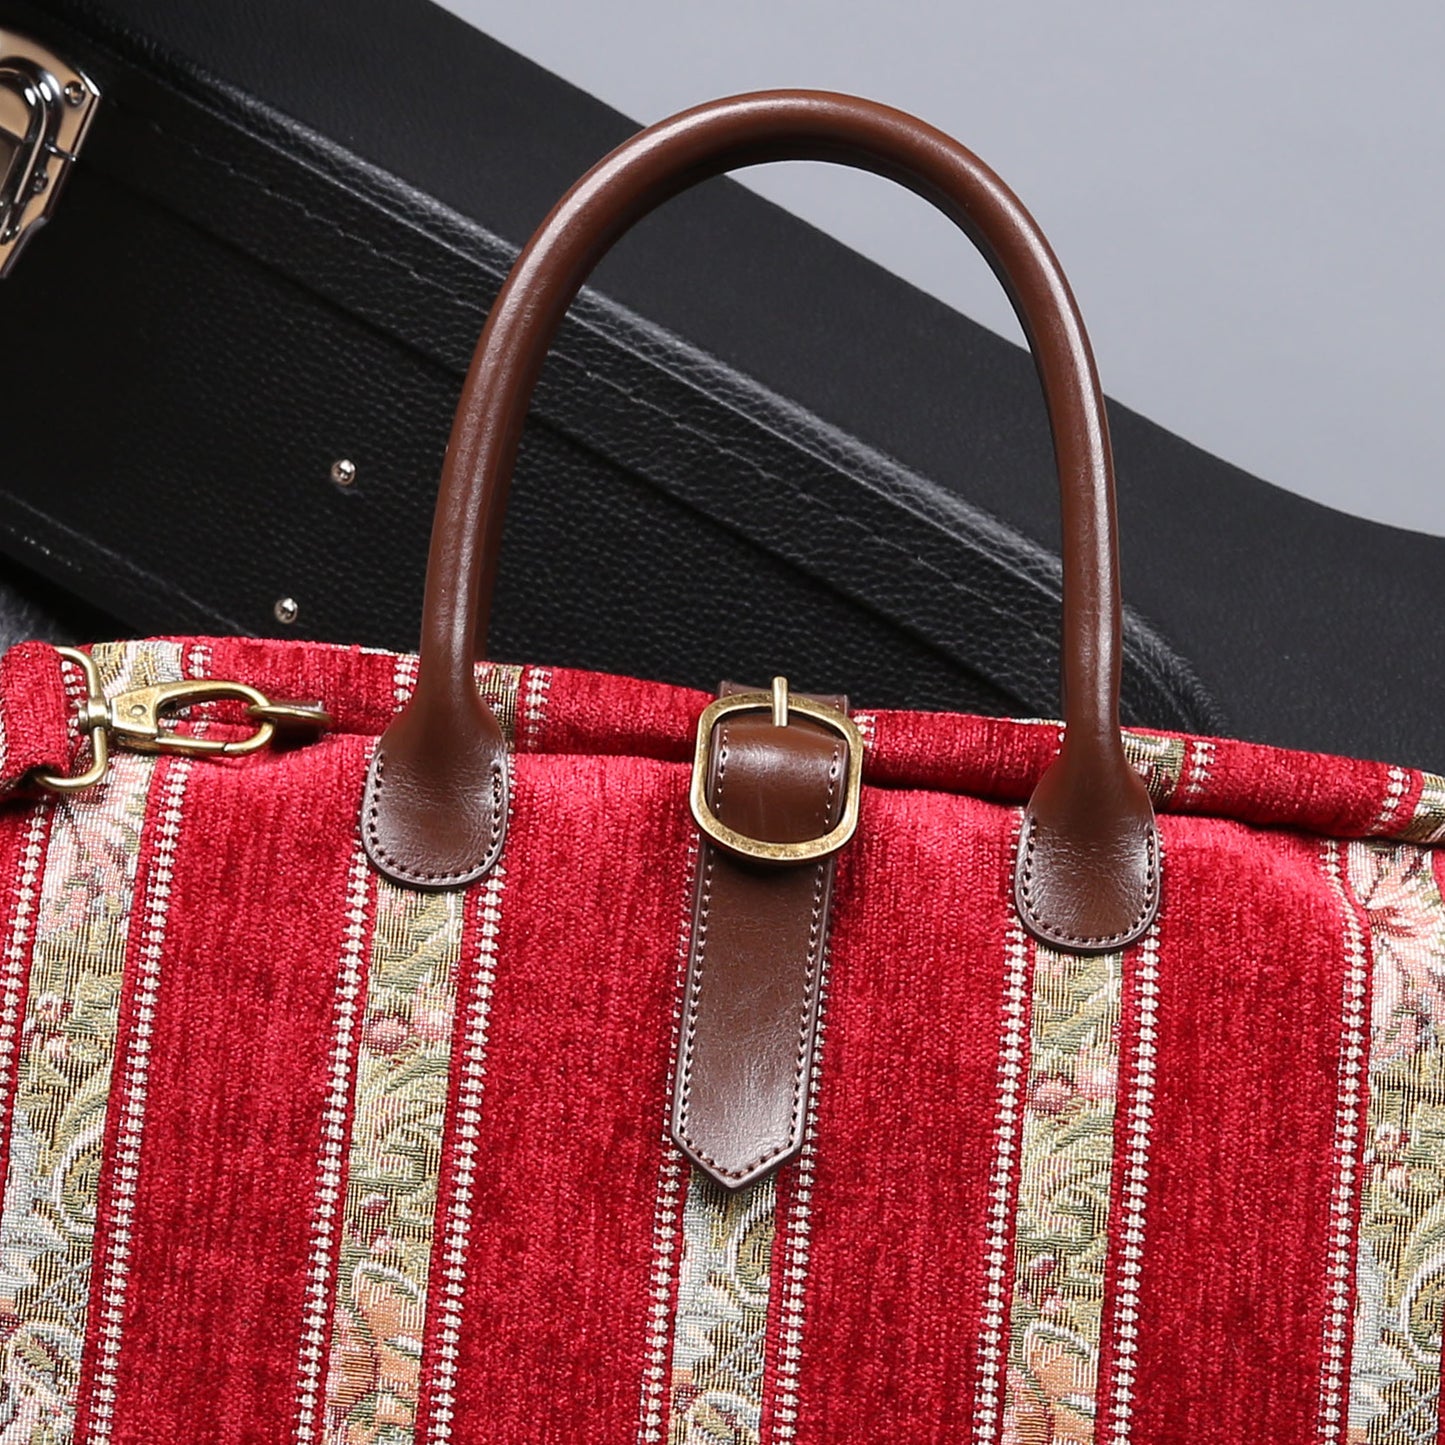 Mary Poppins Carpet Bag Floral Stripes Red